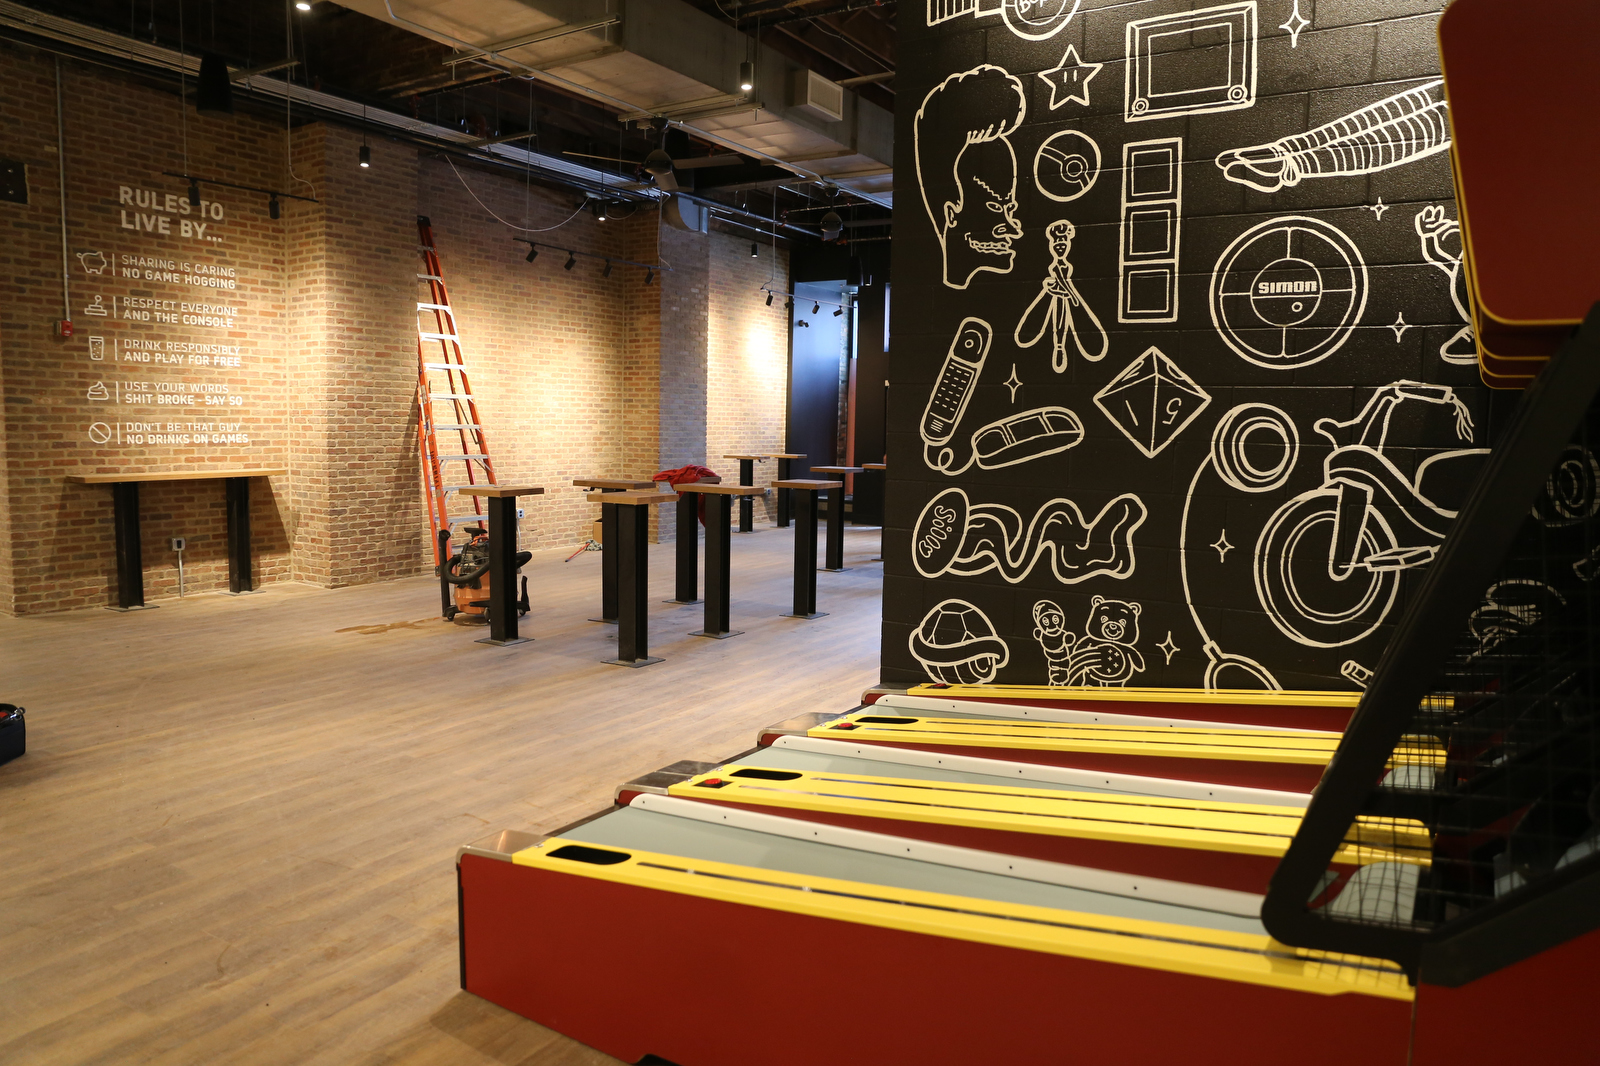 Pins Mechanical Co. and 16-Bit Bar and Arcade set to open soon in Ohio City  (photos) 